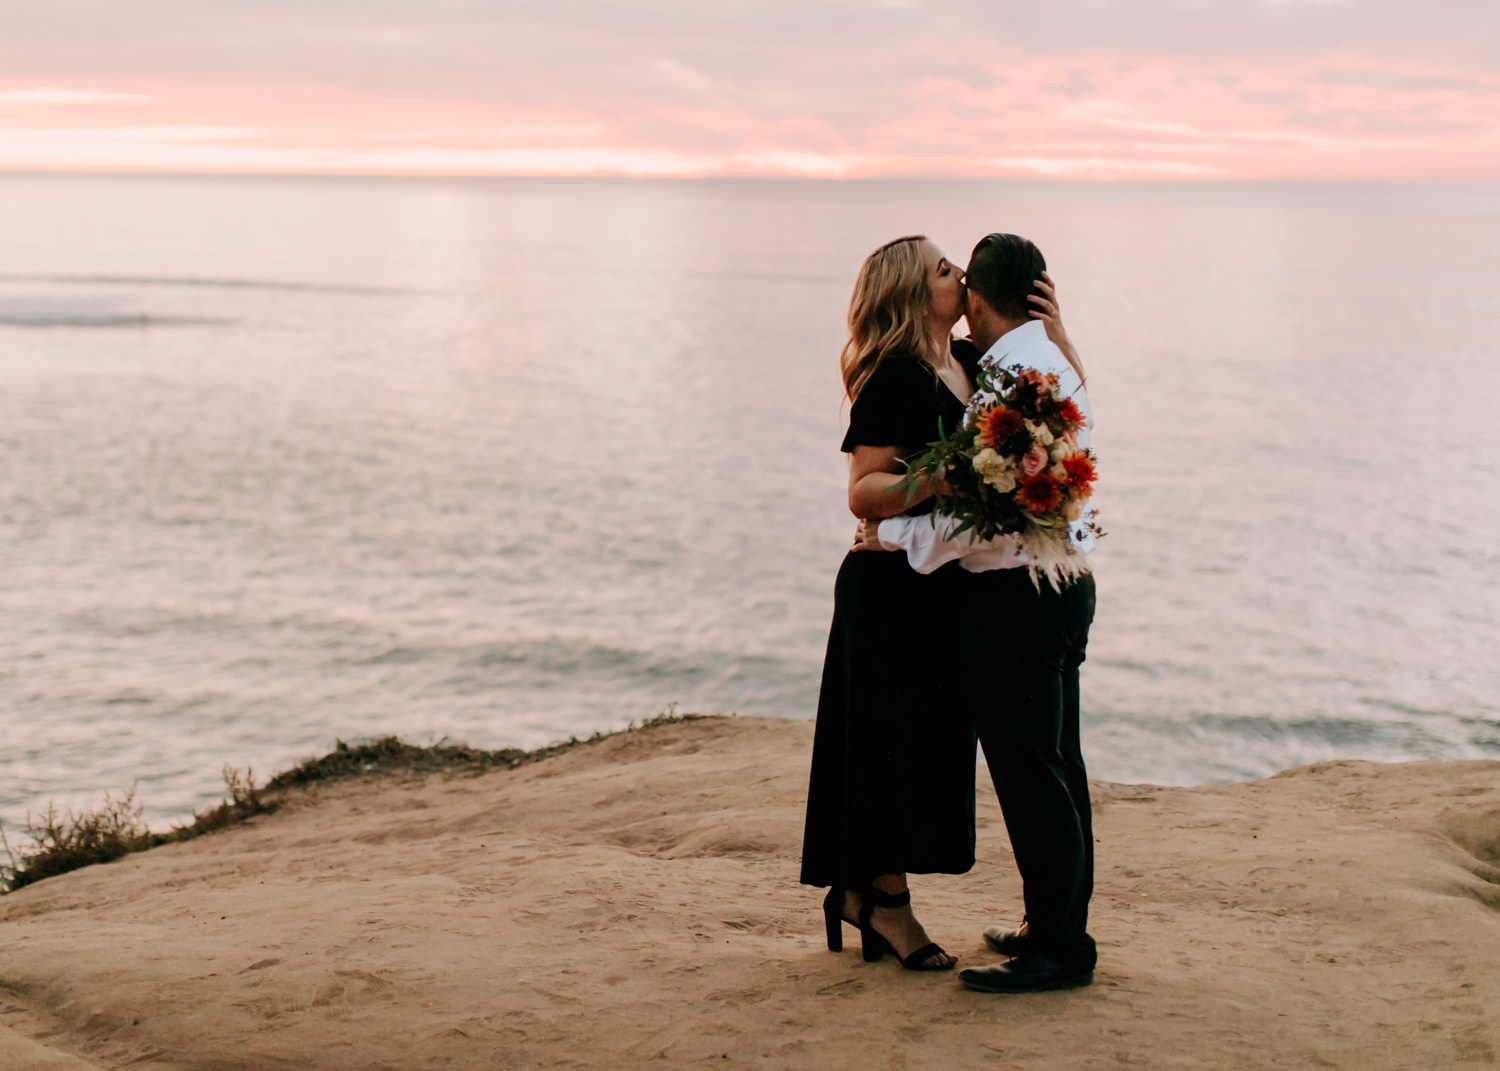 San Diego Engagement Session with an Epic Cotton Candy Sunset [Amanda + Pui]